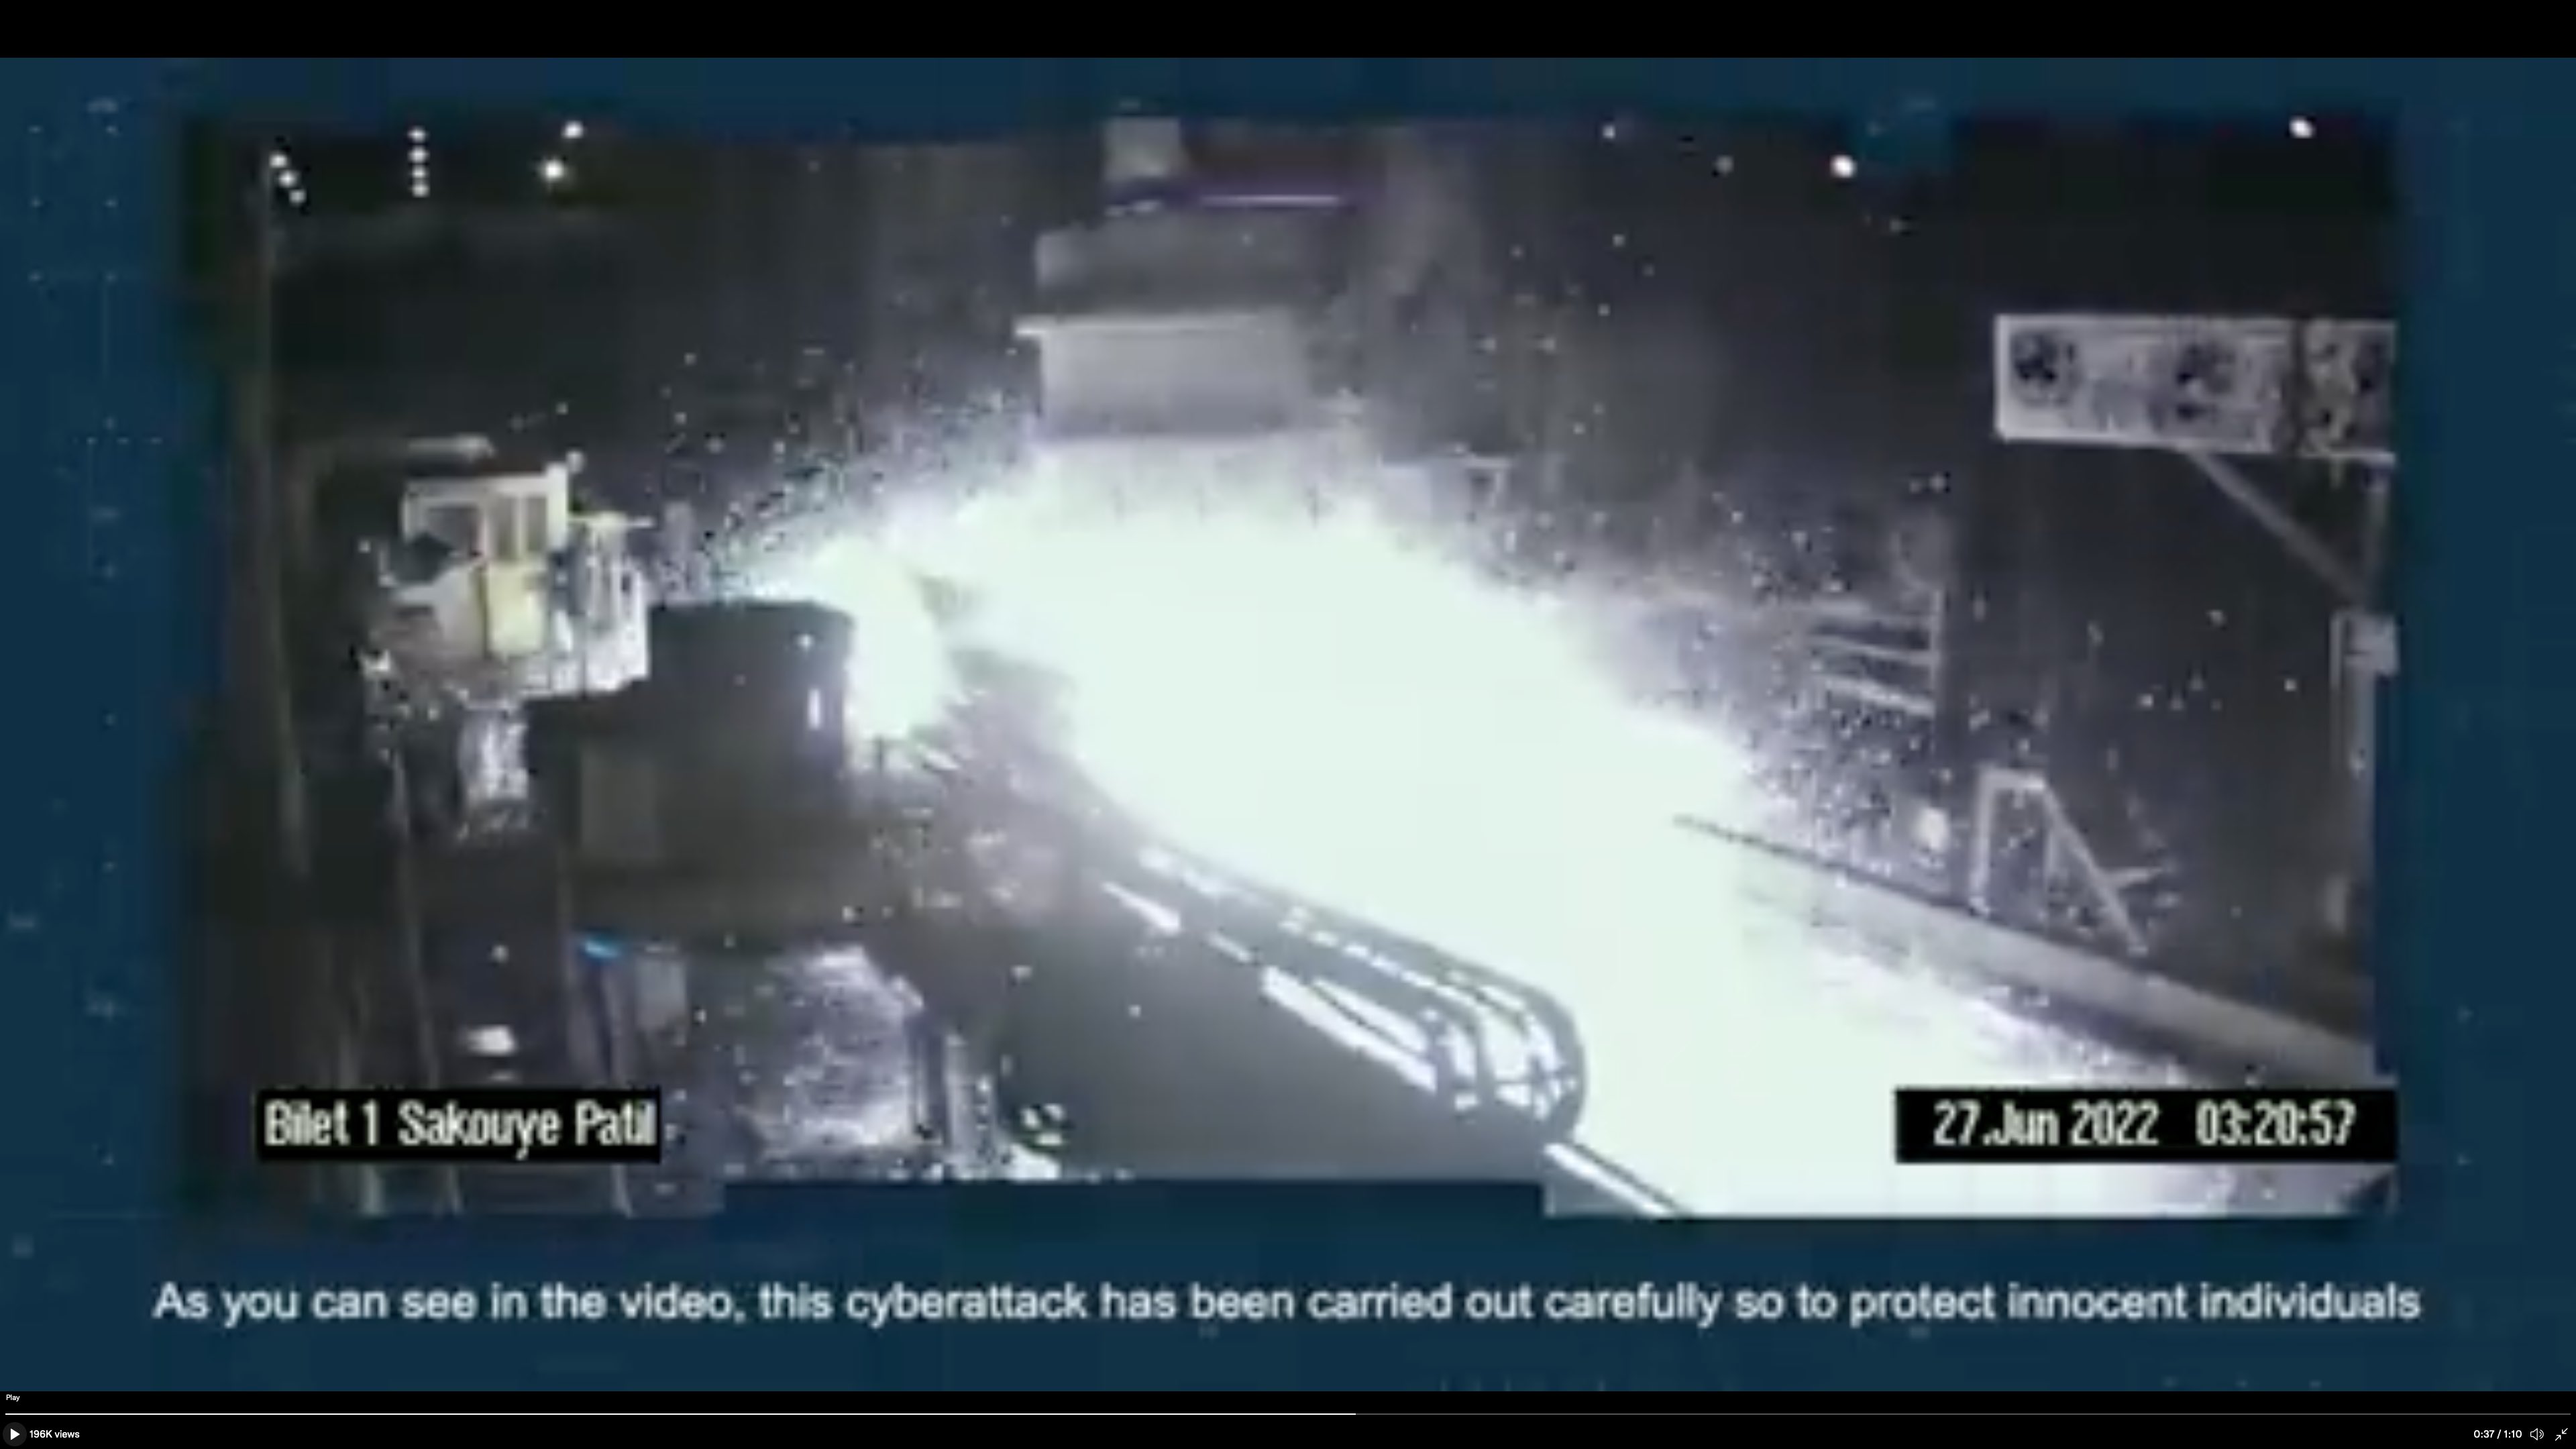 Sparks fly and engulf large industrial machinery in a freeze-frame from the video showing the alleged cyber-attack against one of the Iranian steel mills